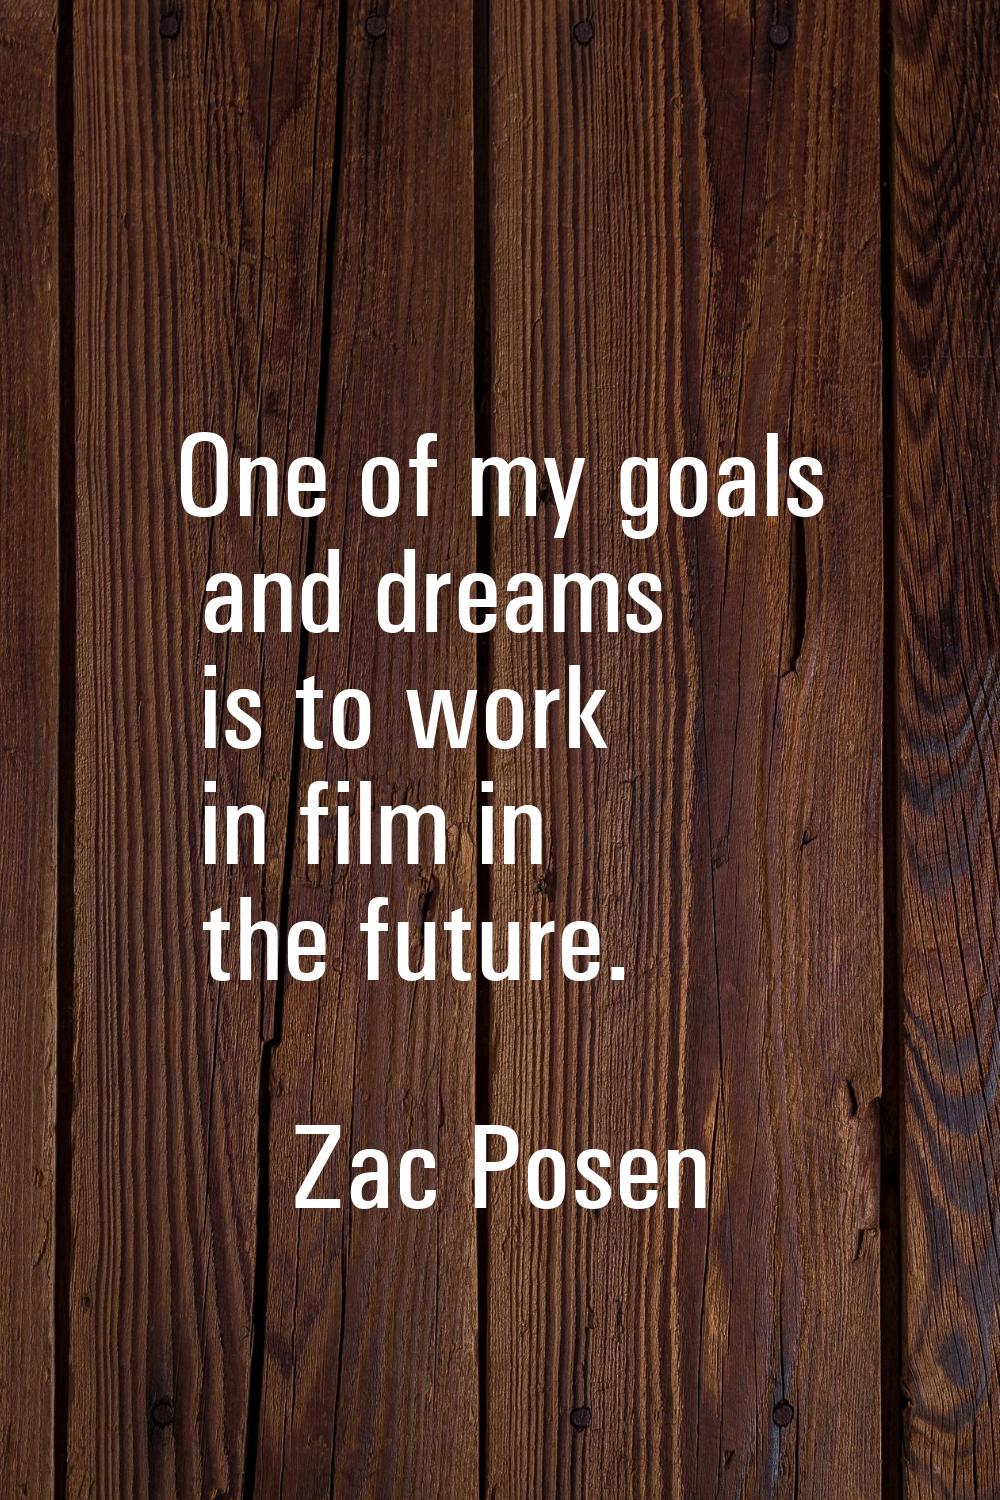 One of my goals and dreams is to work in film in the future.